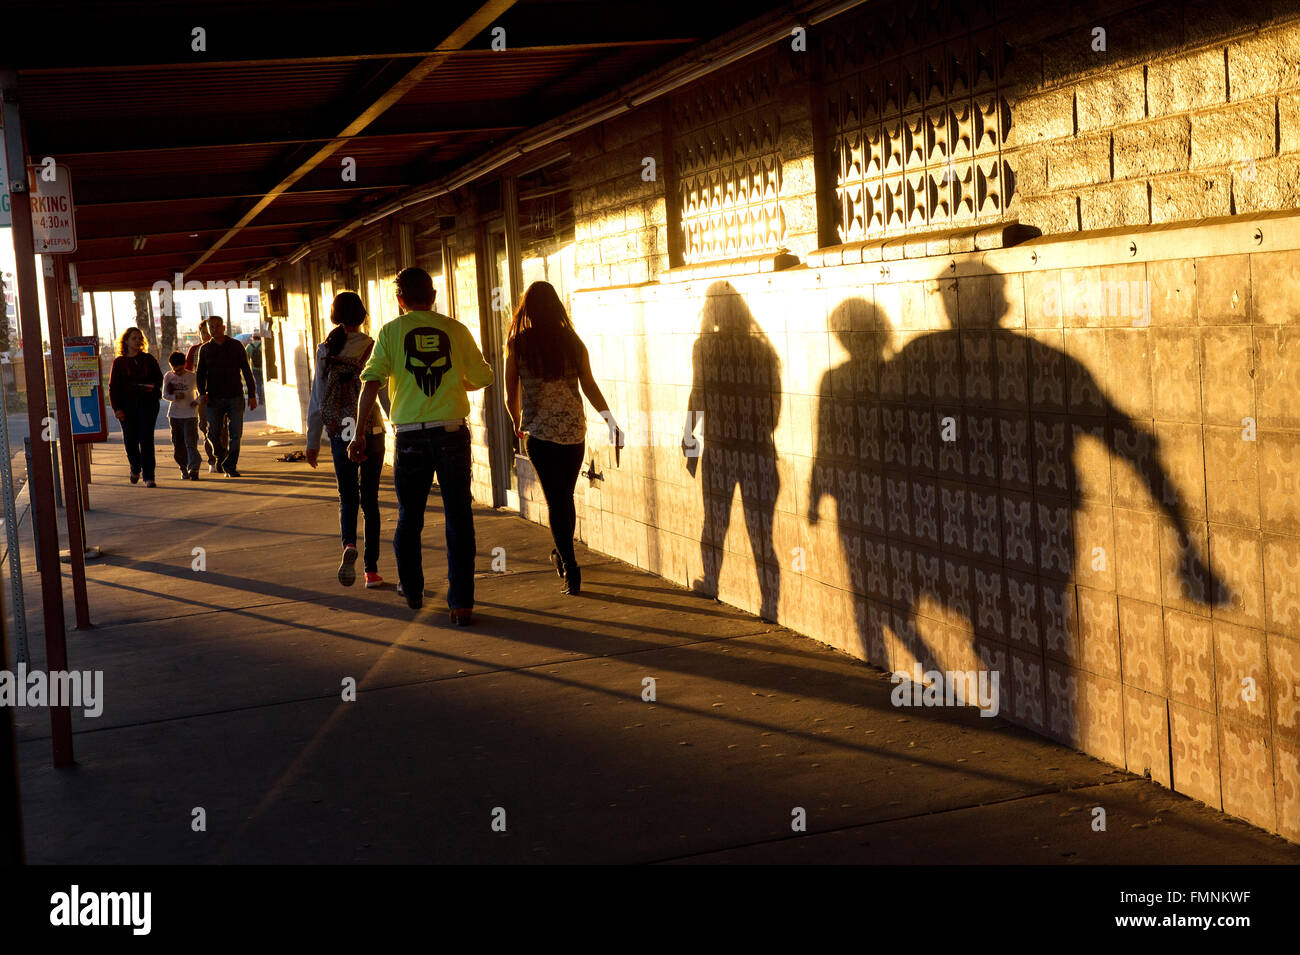 Shadows of people on the wall in the border town of Calexico, California, USA Stock Photo